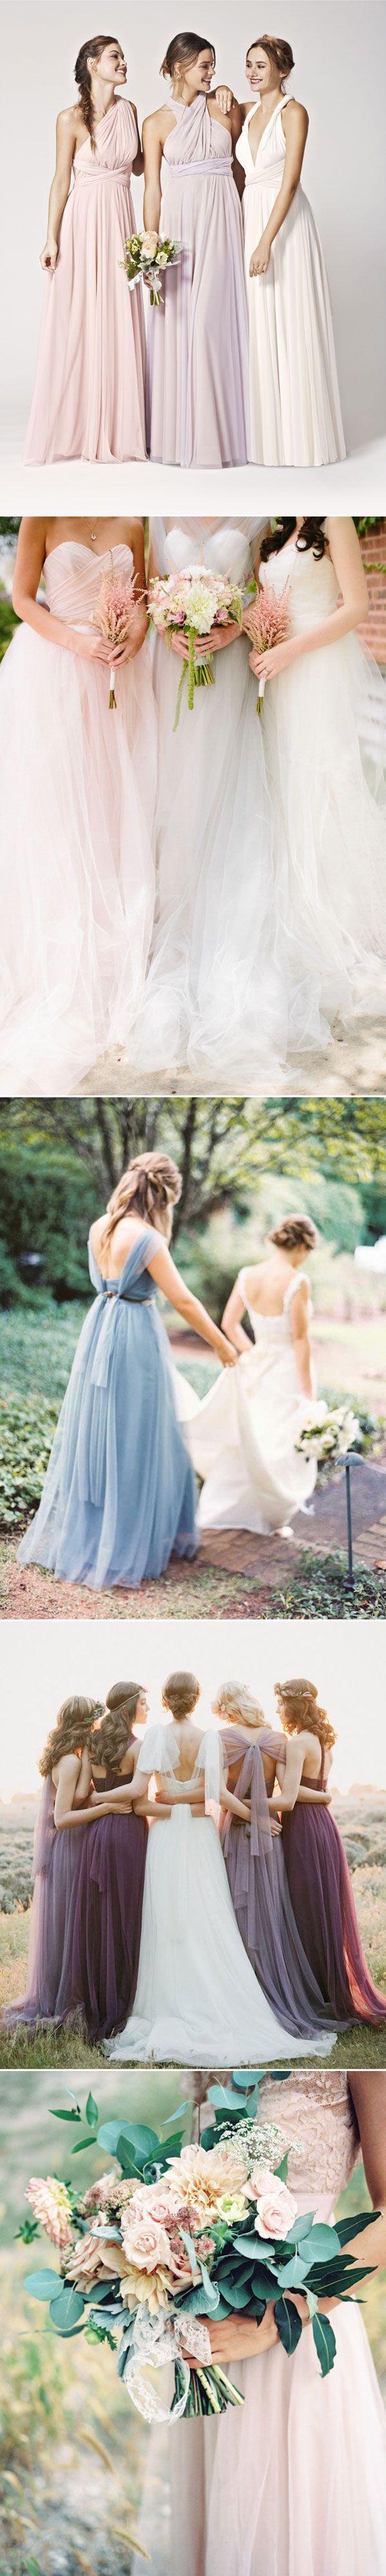 Mariage - Top 6 Bridesmaid Dress Trends For Fall Wedding 2015